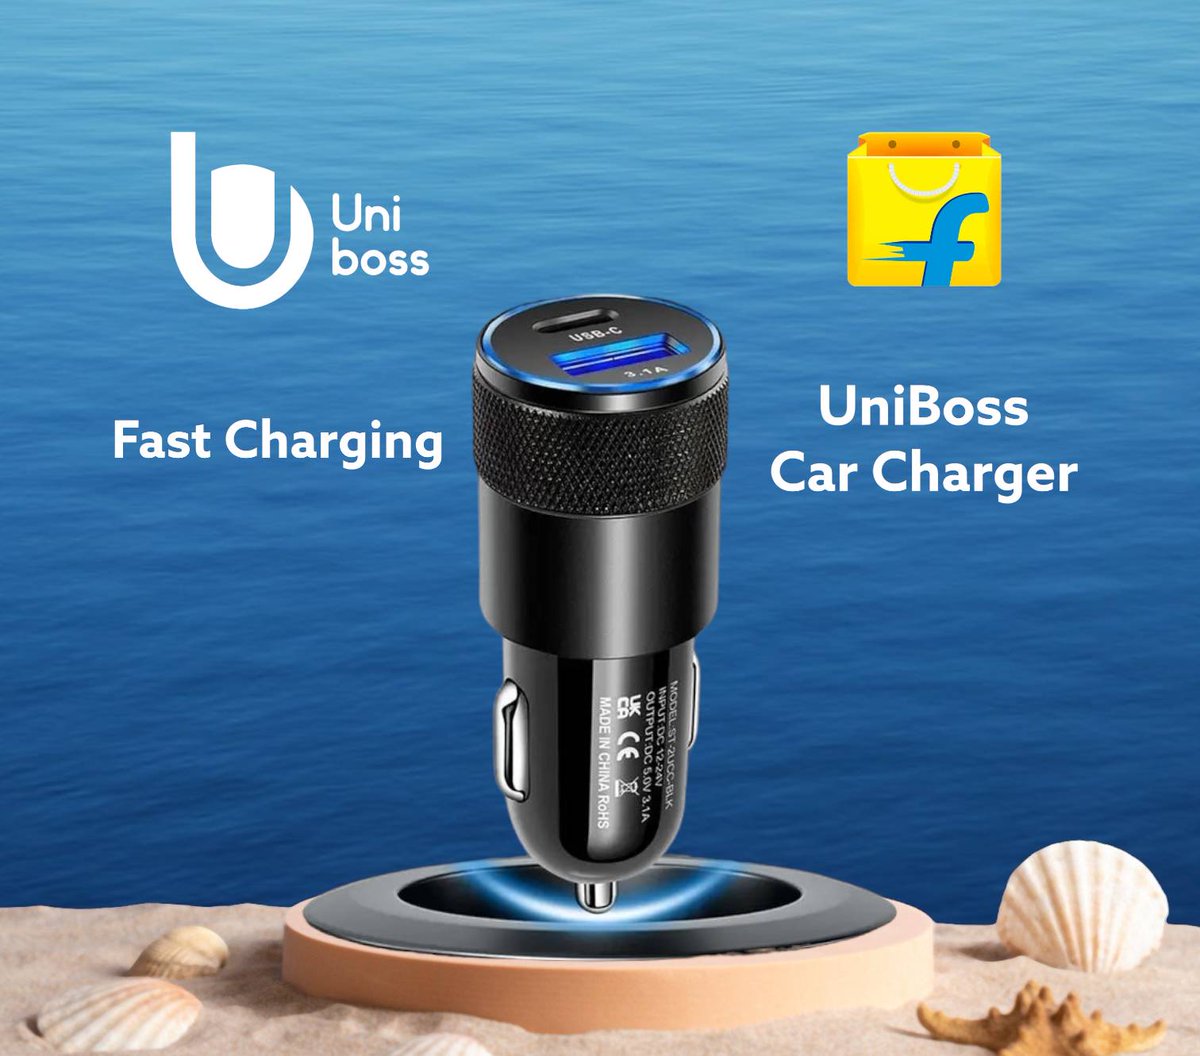 UniBoss Fast Charging Car charger for gadgets. 
@#UniBoss 
#CarCharger #ChargingOnTheGo #PowerUpYourRide #FastCharging #ChargerSale #TechGadgets #CarAccessories #PortablePower #MustHaveTech #CarChargerDeals #PowerfulCharging #ChargeAnywhere #StayConnected #HighSpeedCharging